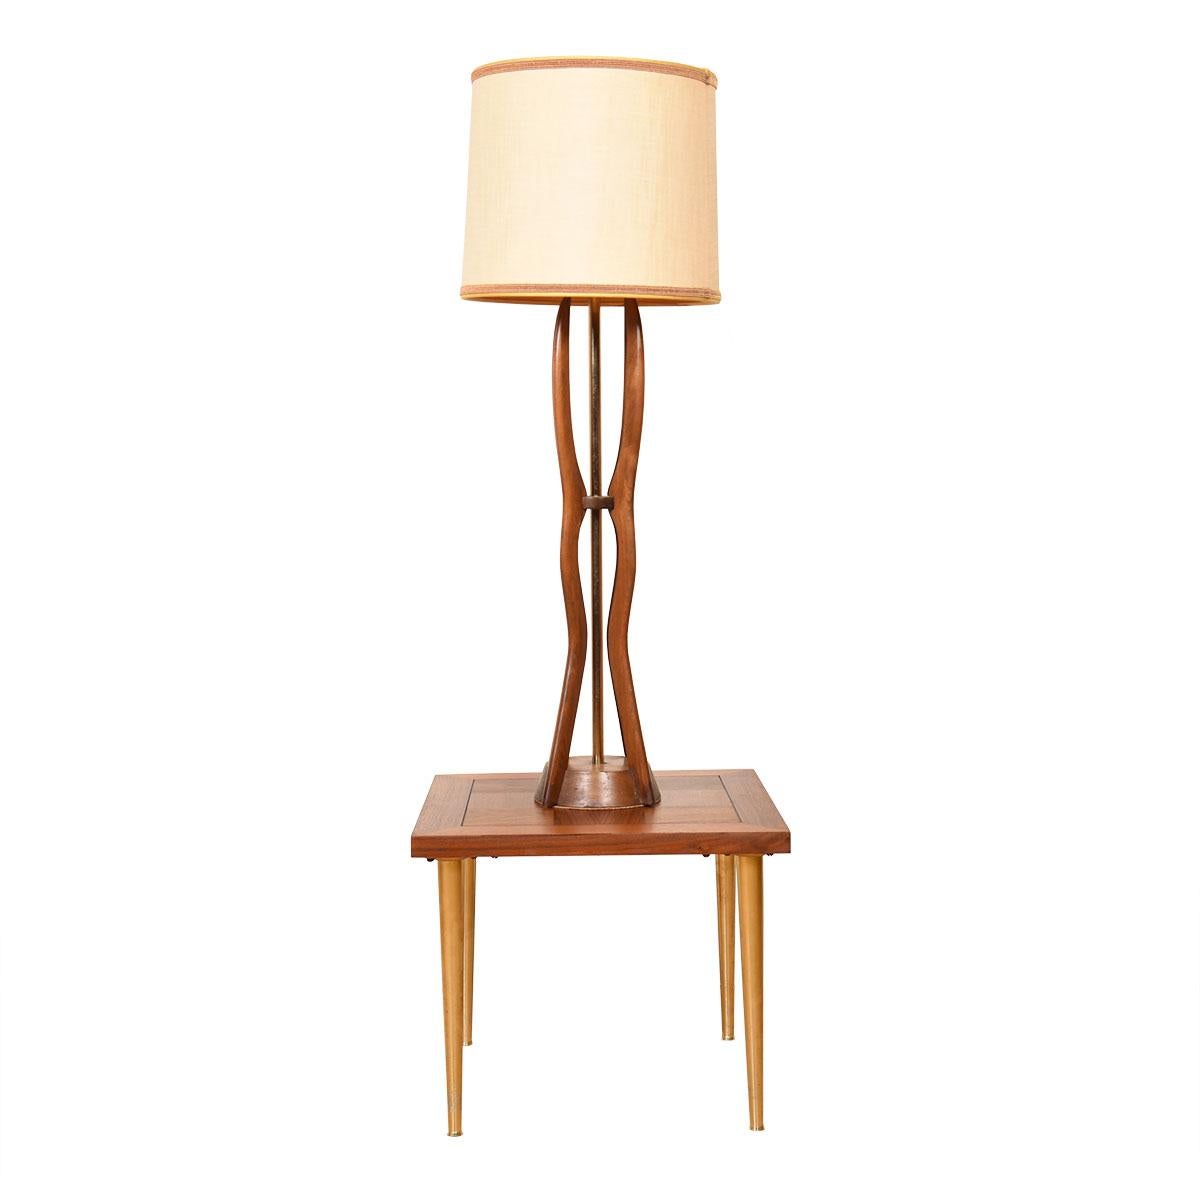 Sculptural MCM Table Lamp in Walnut

Additional information:
Material: Walnut
Featured at DC

Dimension: Ø 8? x H 30.75?, 36.25 (top of shade).